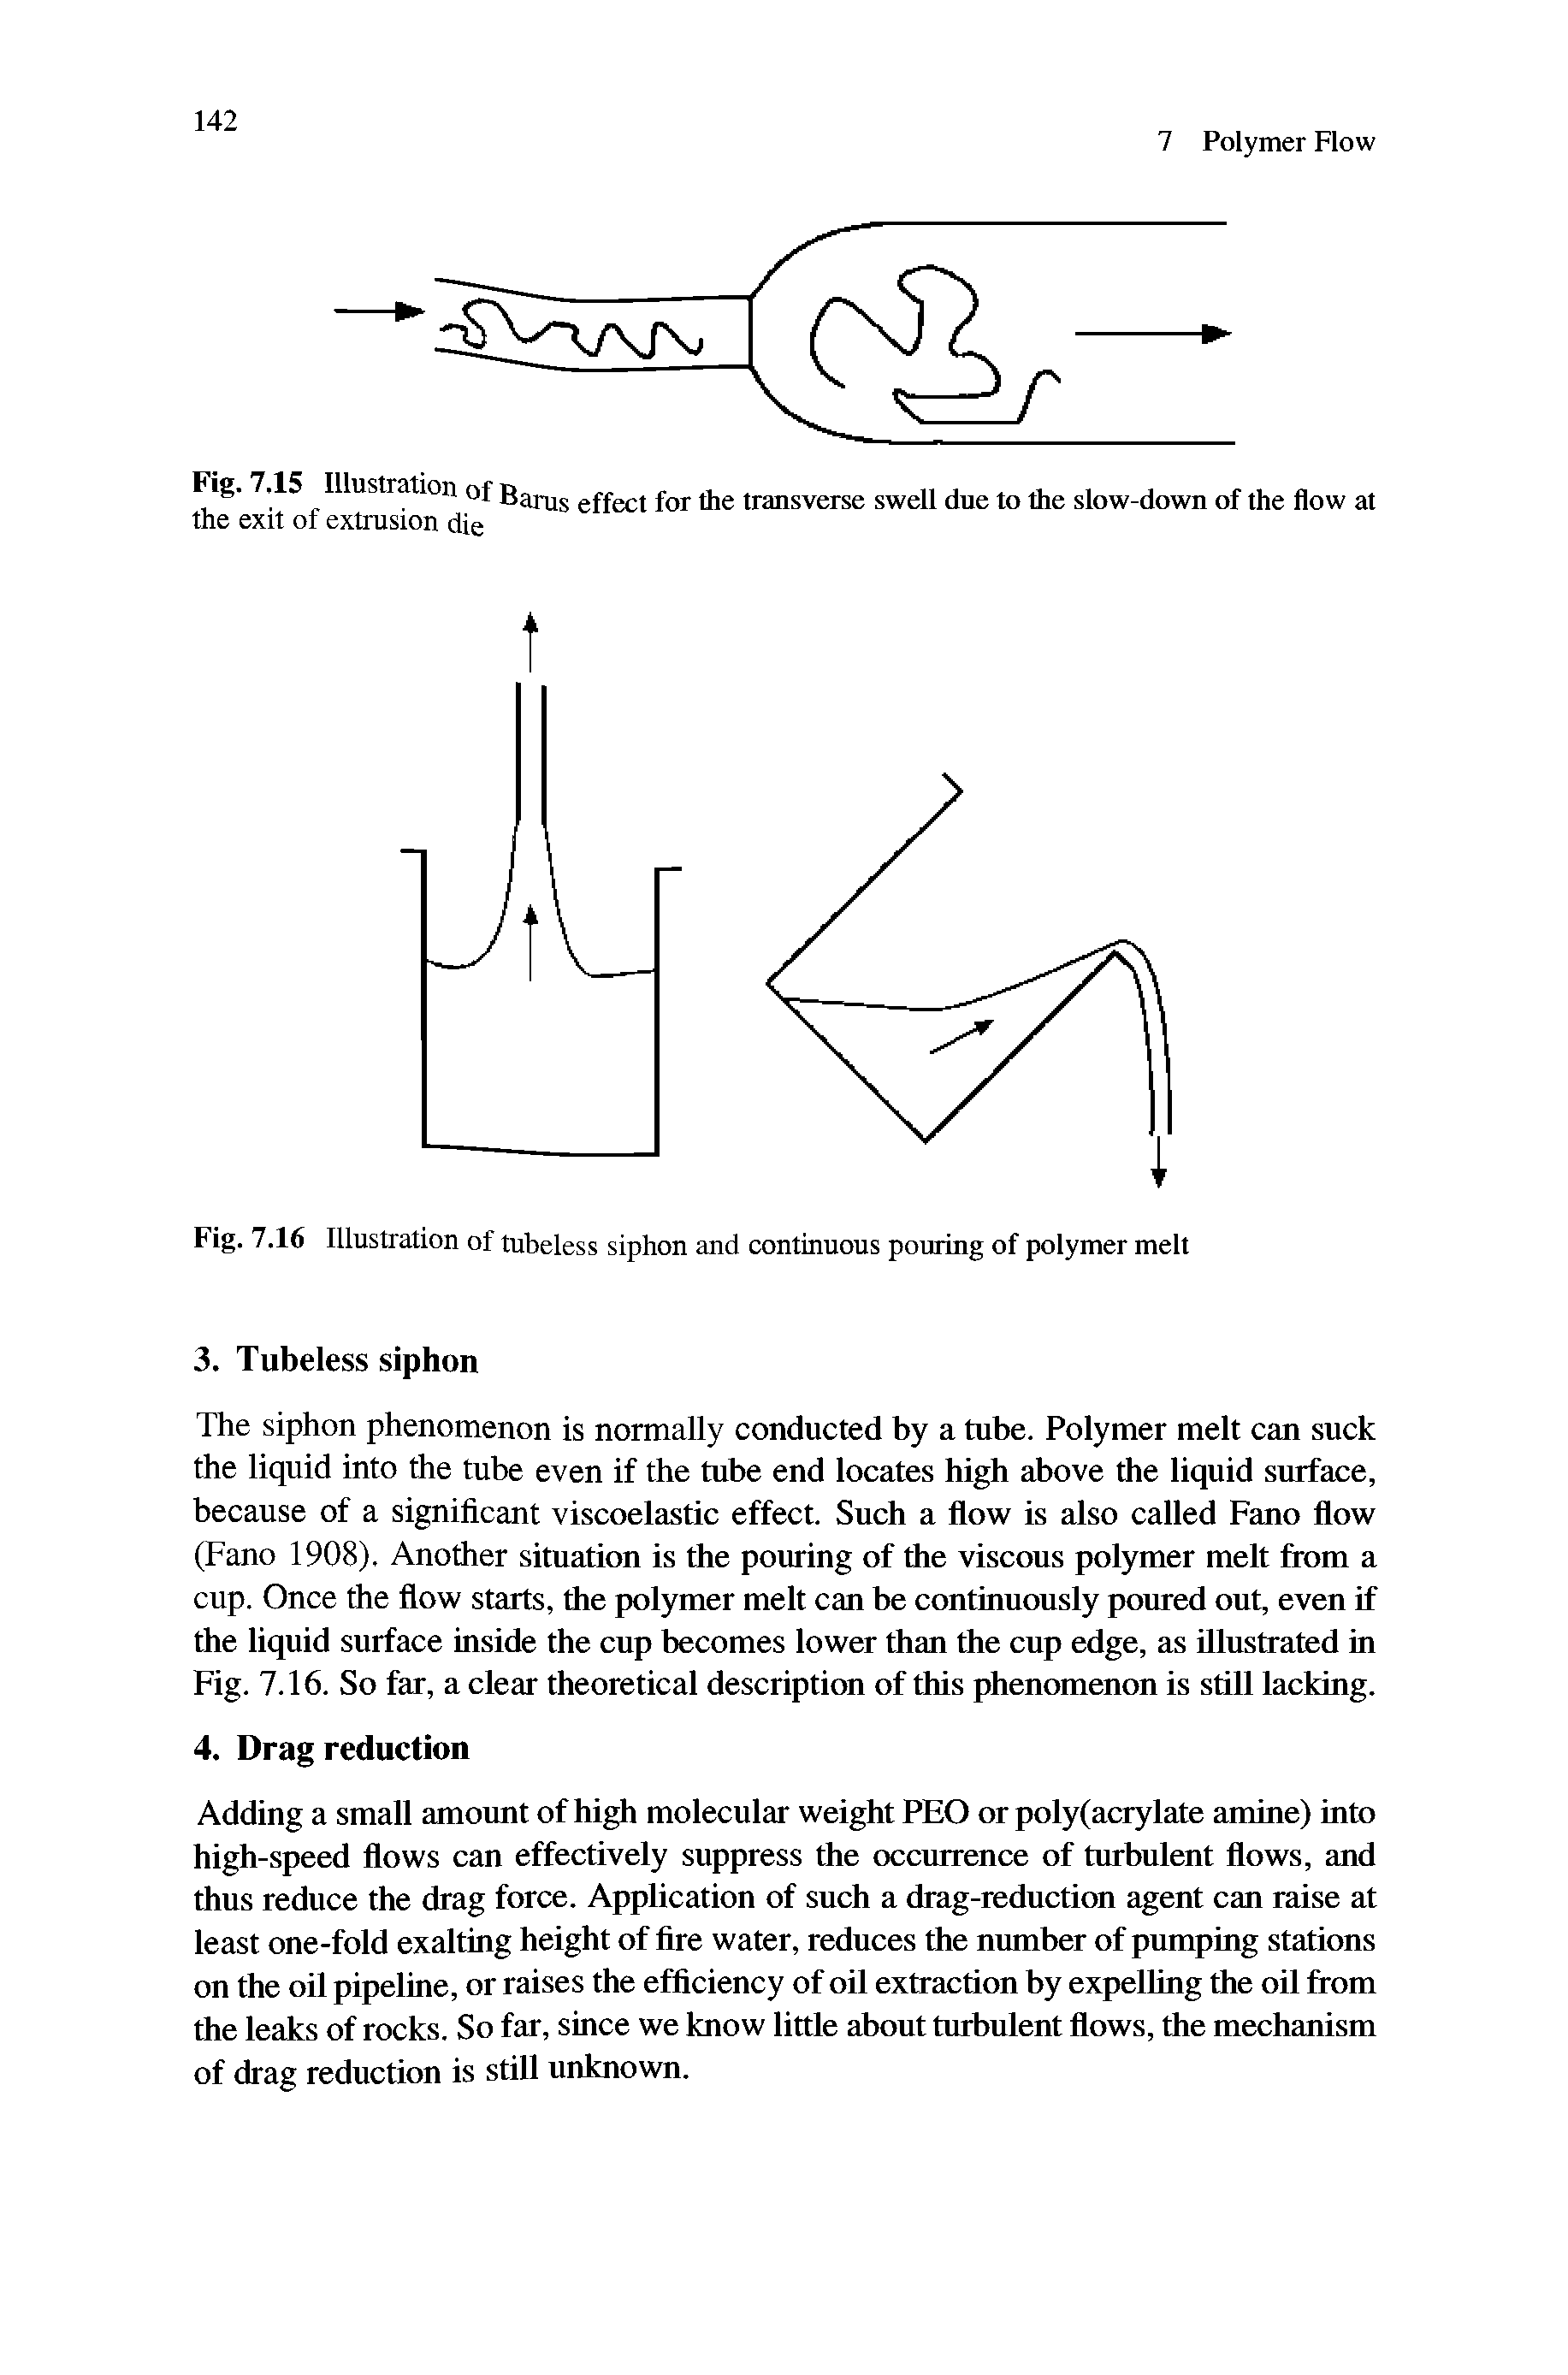 Fig. 7.15 Illustration of Barus effect for the transverse swell due to the slow-down of the flow at the exit of extrusion die...